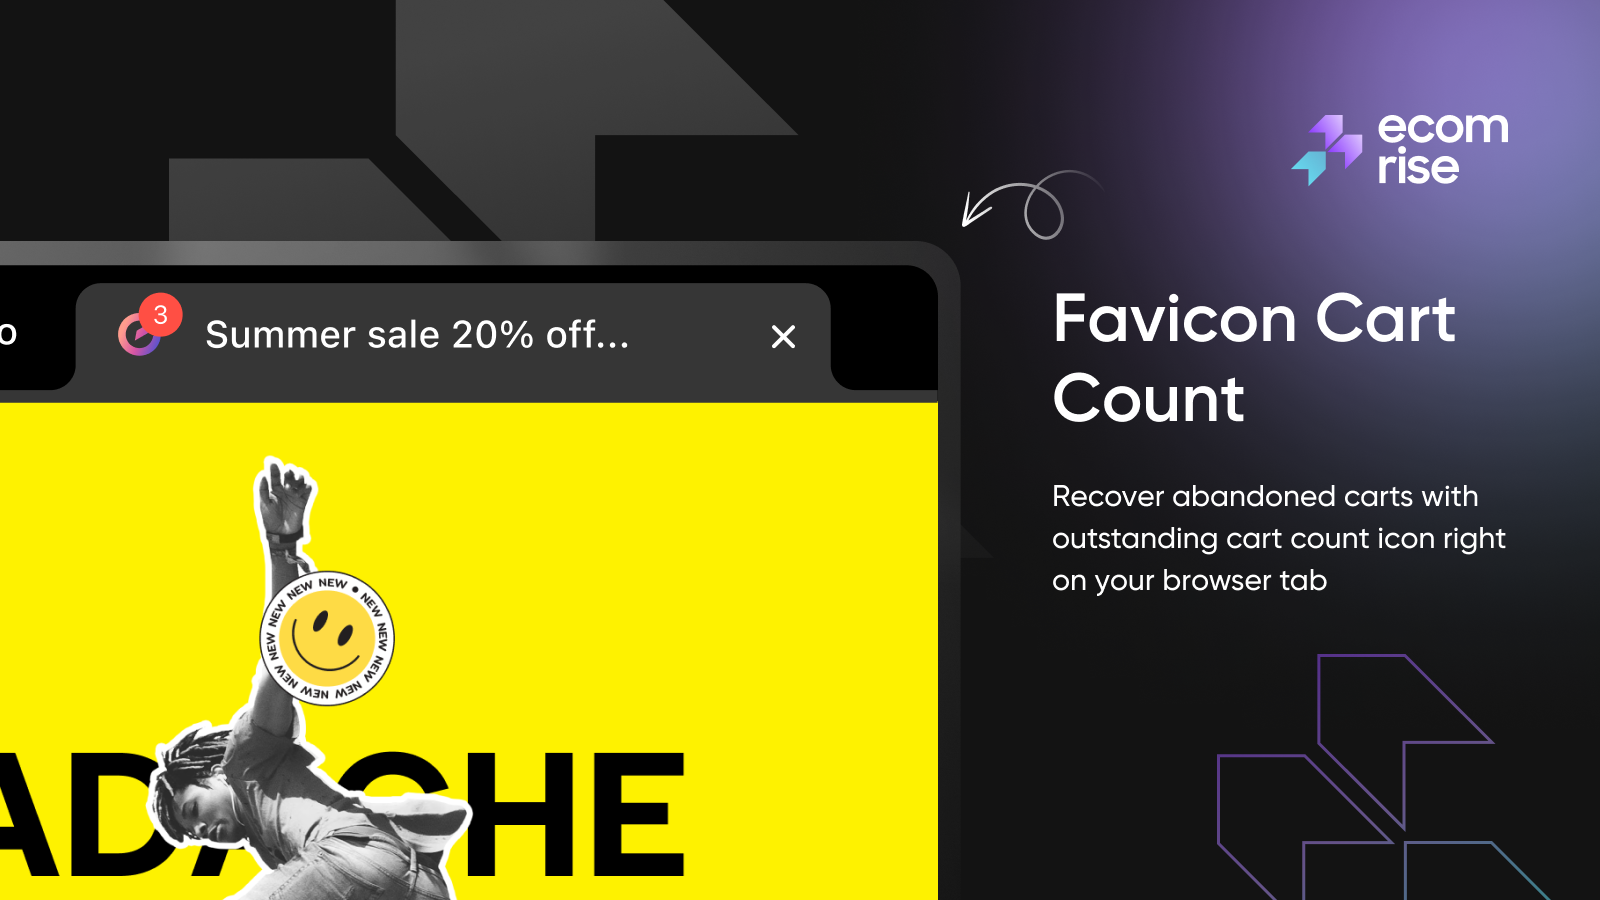 Favicon Cart Count to recover abandoned carts